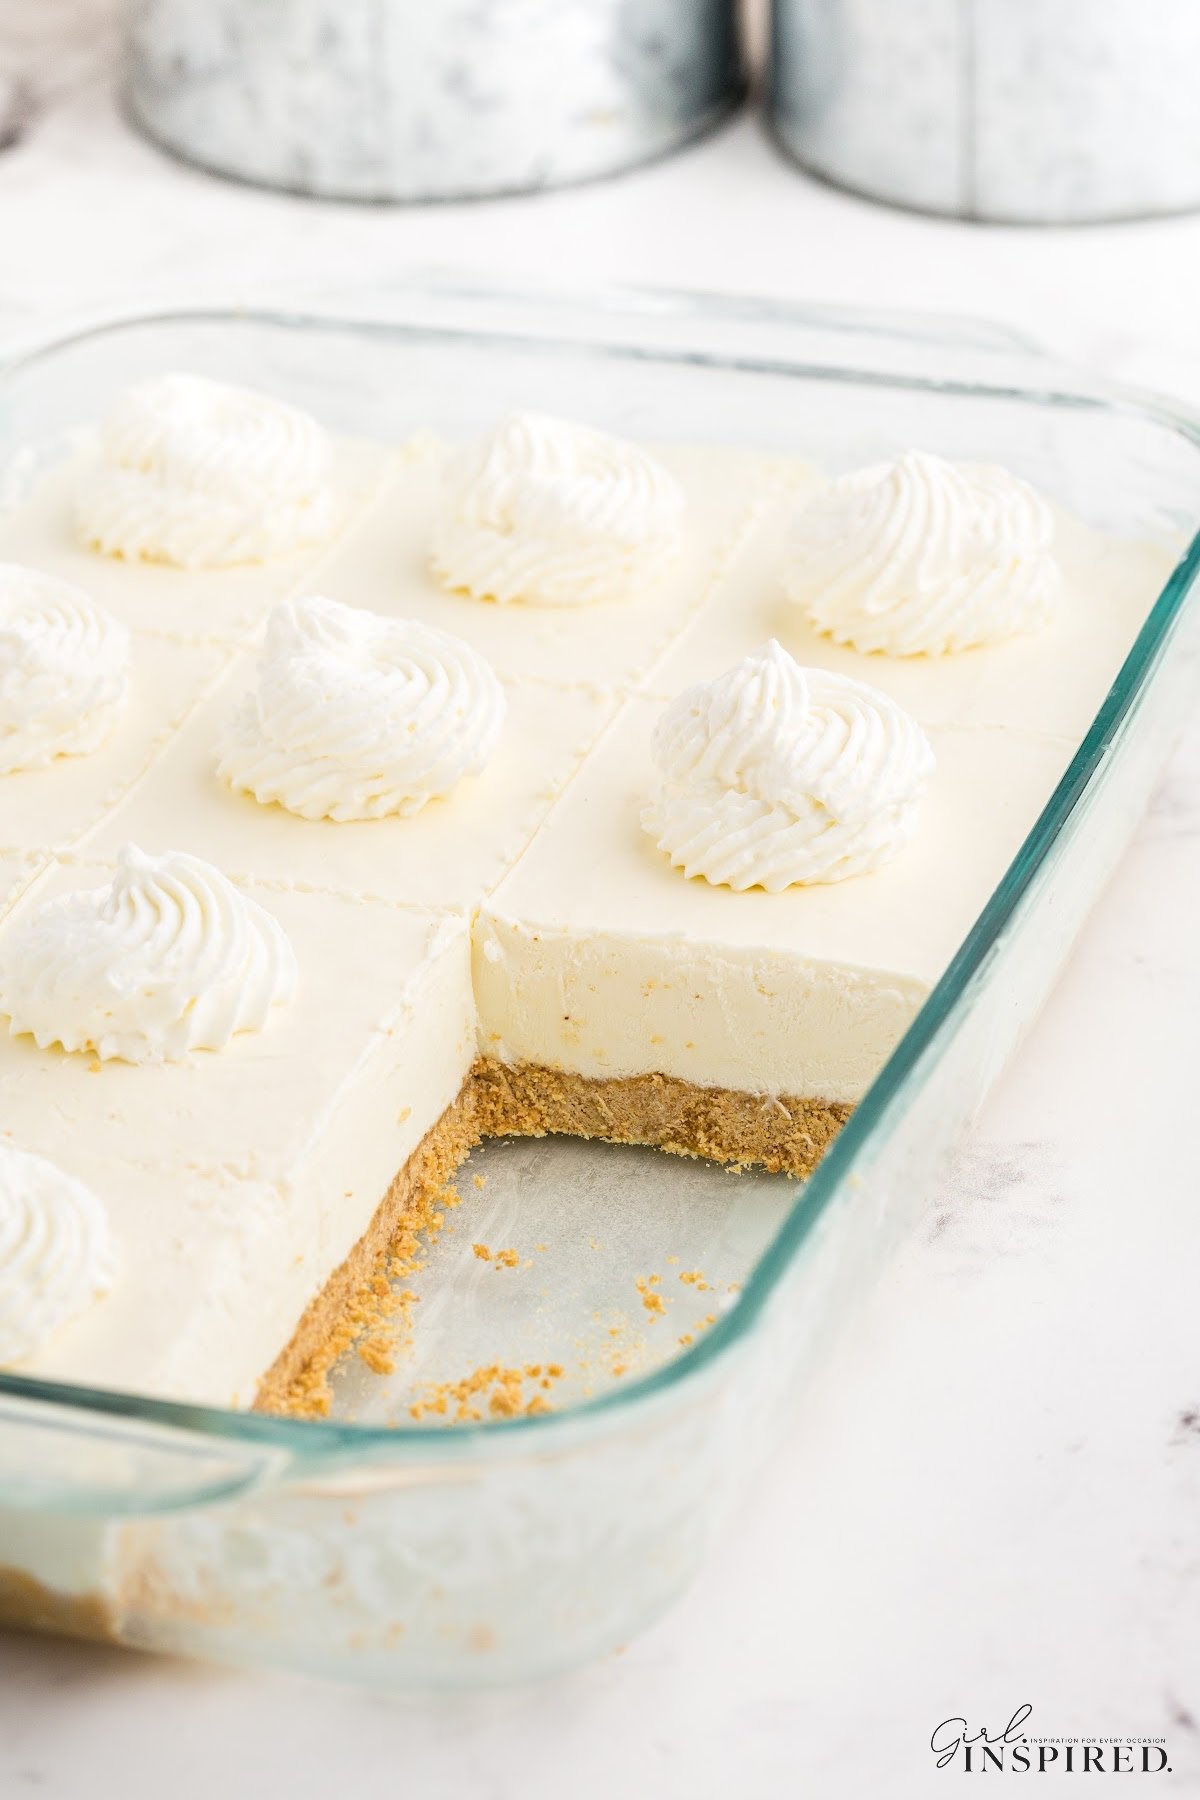 A dish full of no bake cheesecake bars, with one taken out.